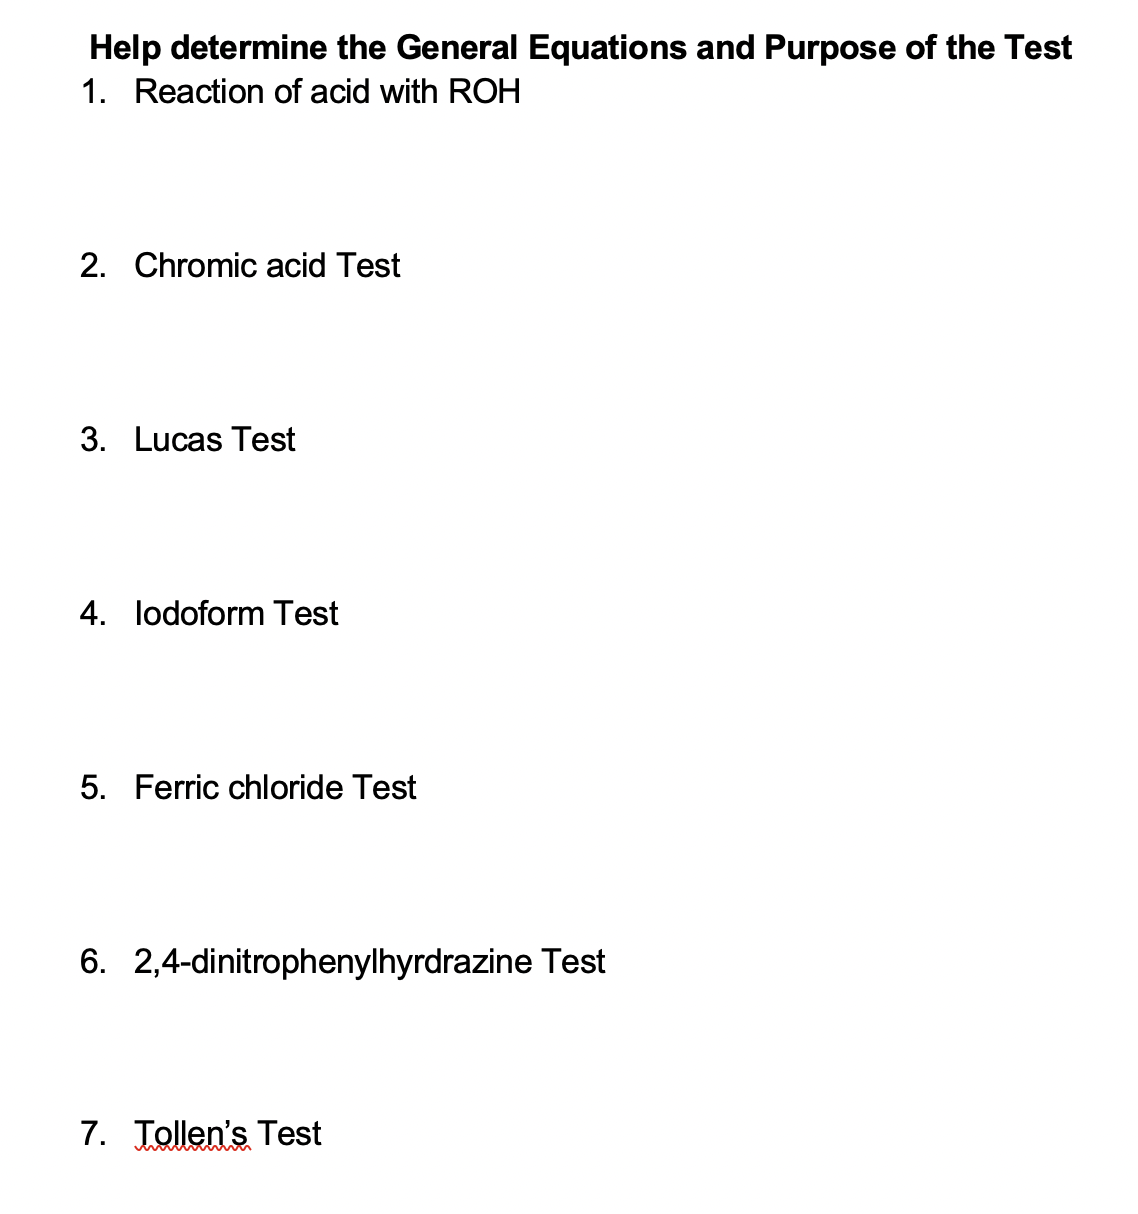 Help determine the General Equations and Purpose of the Test
1. Reaction of acid with ROH
2. Chromic acid Test
3. Lucas Test
4. lodoform Test
5. Ferric chloride Test
6. 2,4-dinitrophenylhyrdrazine Test
7. Tollen's Test
